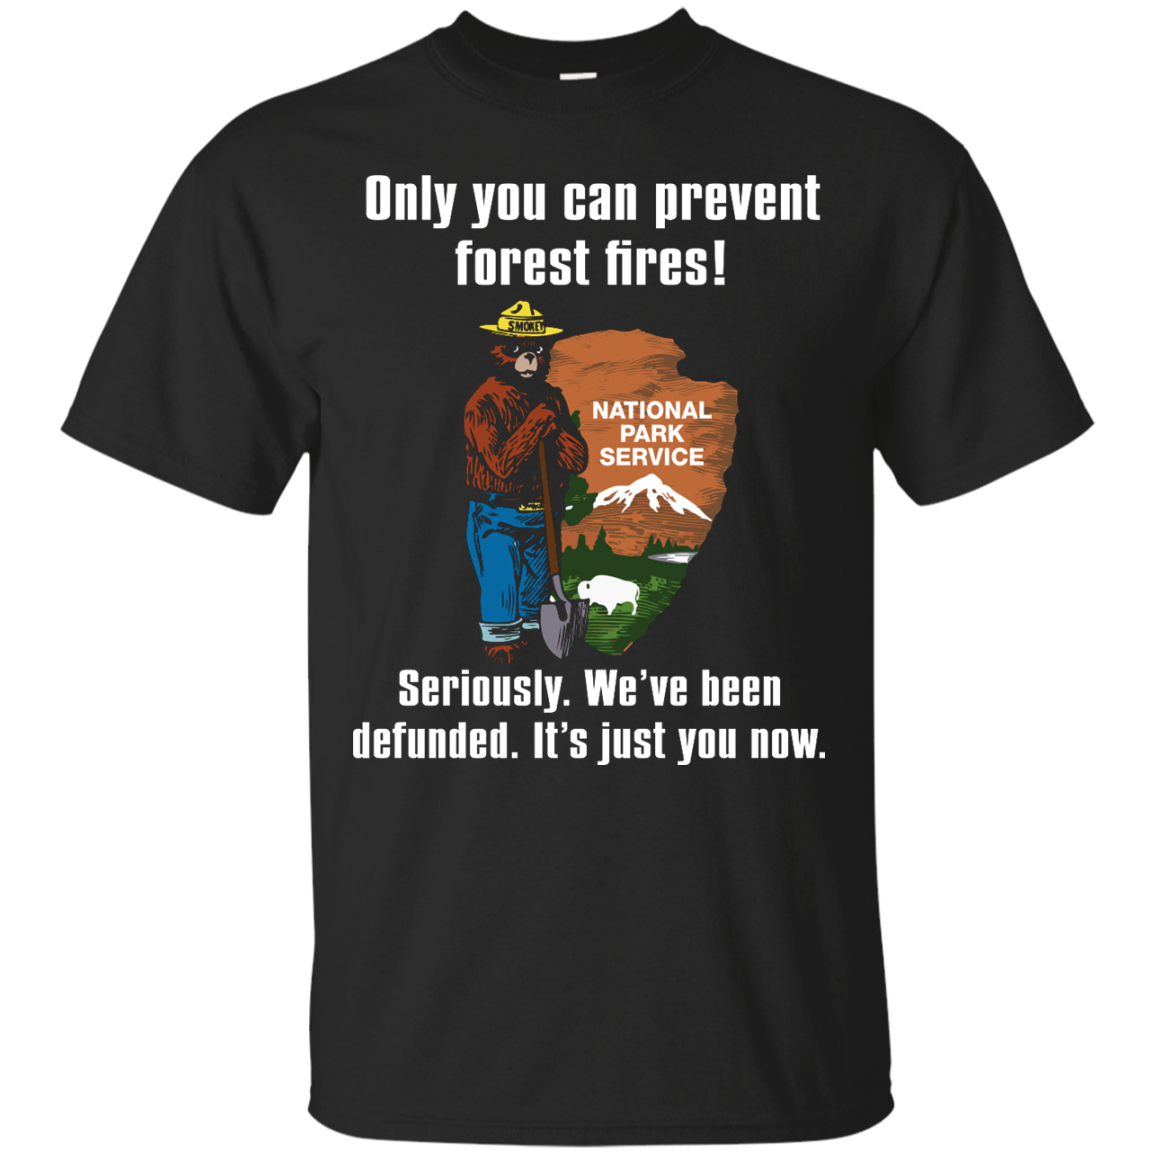 Only you can prevent forest fires shirt, tank, long sleeve